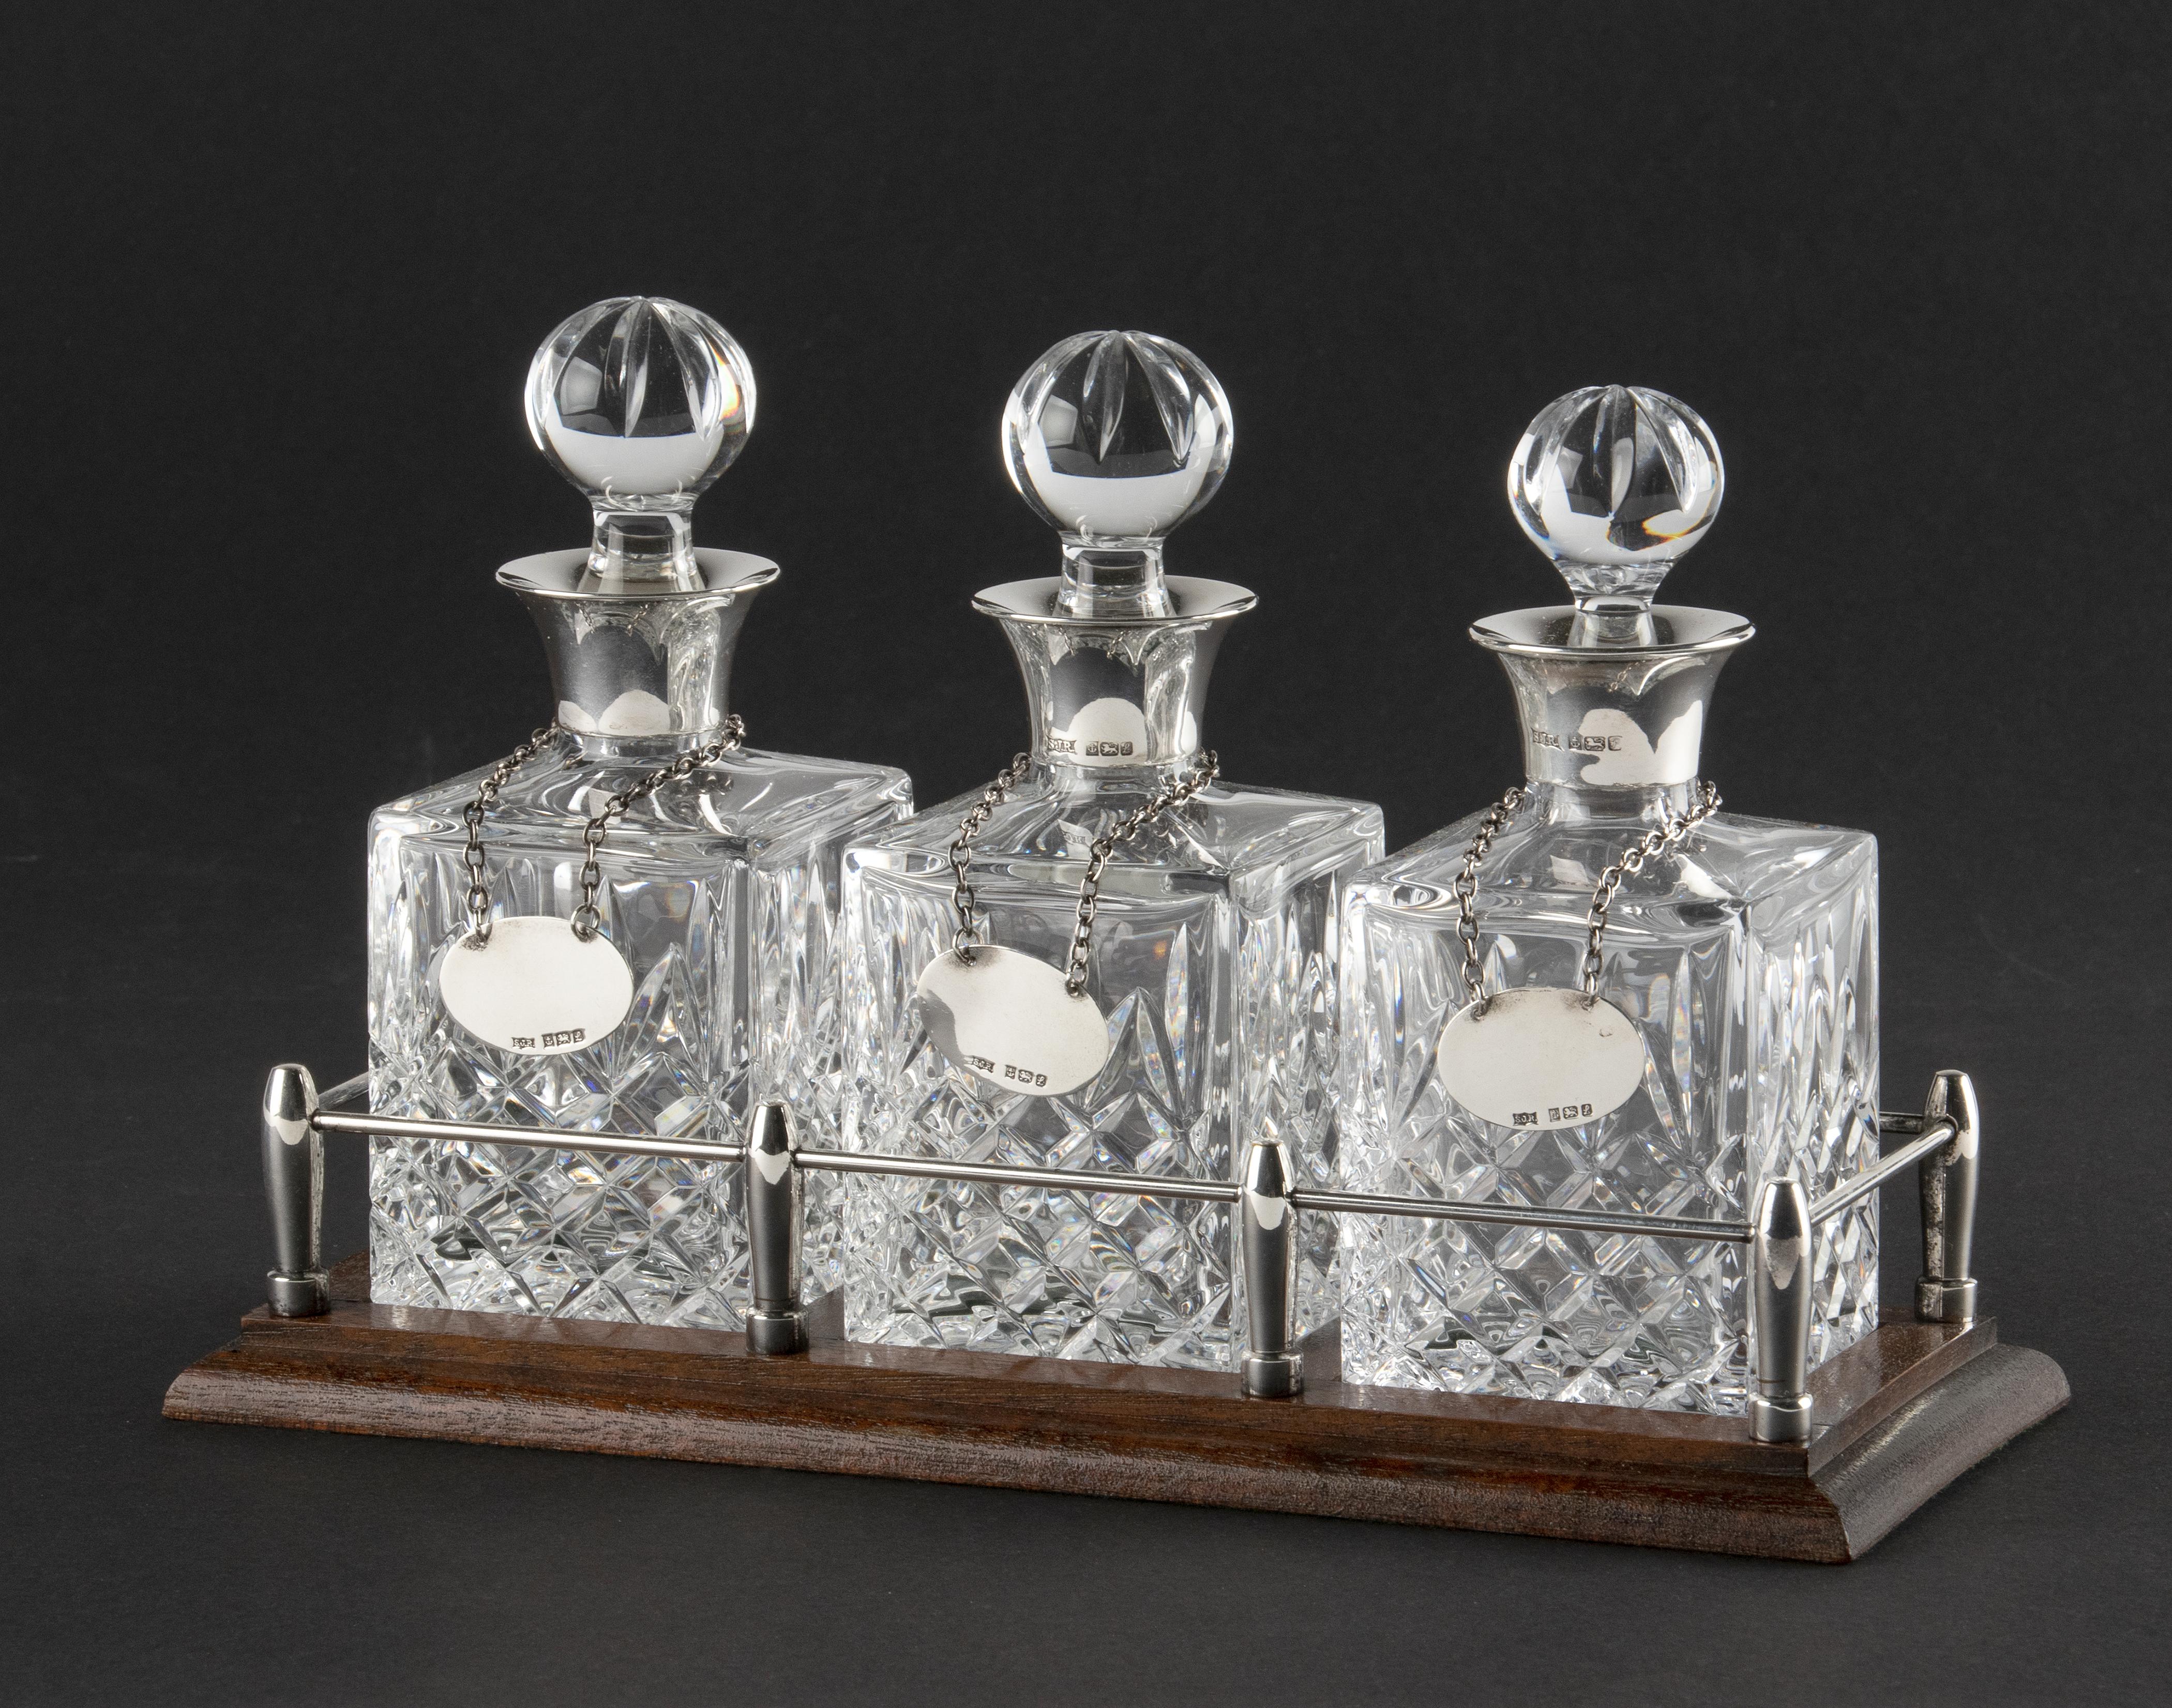 Beautiful liqueur set from England. It is a wooden rack with silver plated railing, containing 3 crystal bottles with sterling silver necks. Each bottle has a sterling silver emblem, which can optionally be engraved with names of, for example,